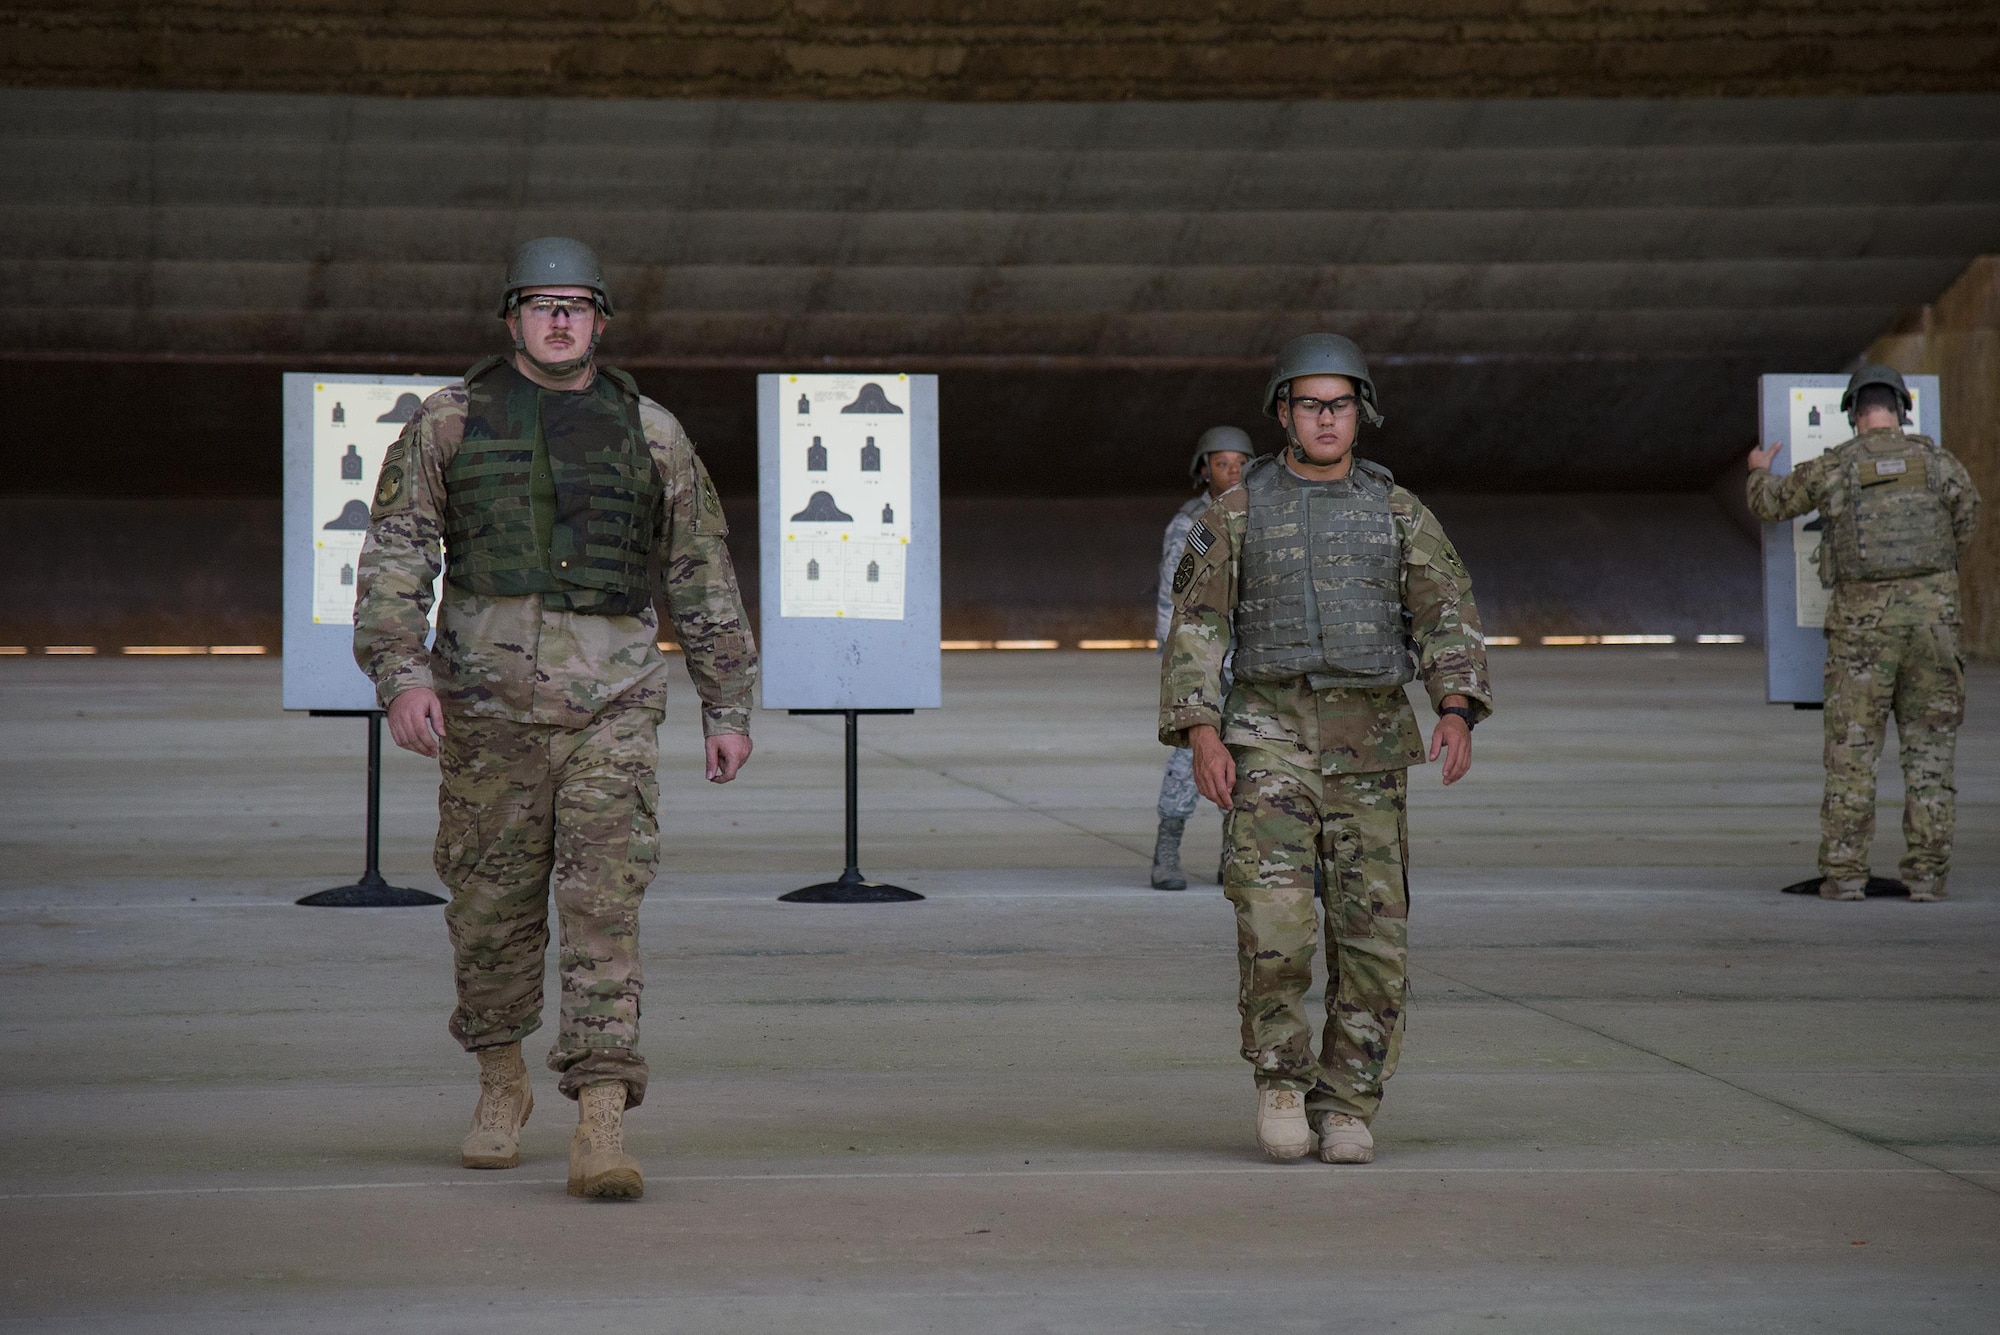 Airmen walk back after placing their targets at the Combat Arms Training and Maintenance range, July 25, 2017, at Moody Air Force Base, Ga. During CATM, Airmen must demonstrate quality safety standards while handling and shooting their weapons in order to qualify to deploy. (U.S. Air Force photo by Airman 1st Class Erick Requadt)